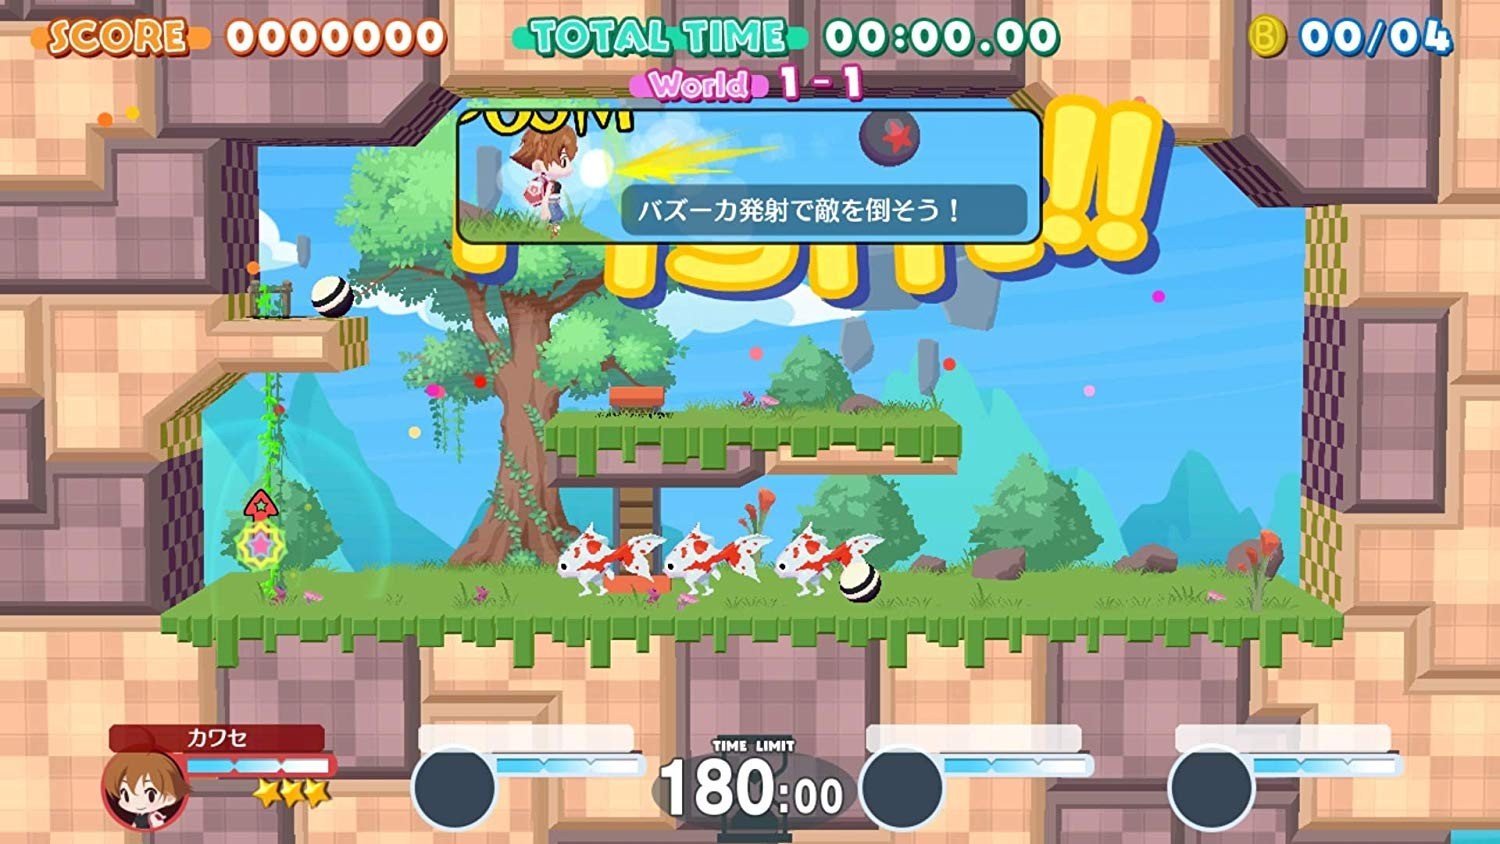 Umihara Kawase, Umihara Kawase BaZooKa, Umihara Kawase BaZooKa!!, 海腹川背 BaZooKa!!, Multi-language, Success, Japan, PS4, PlayStation 4, Nintendo Switch, Switch, pre-order, gameplay, features, release date, price, trailer, screenshots